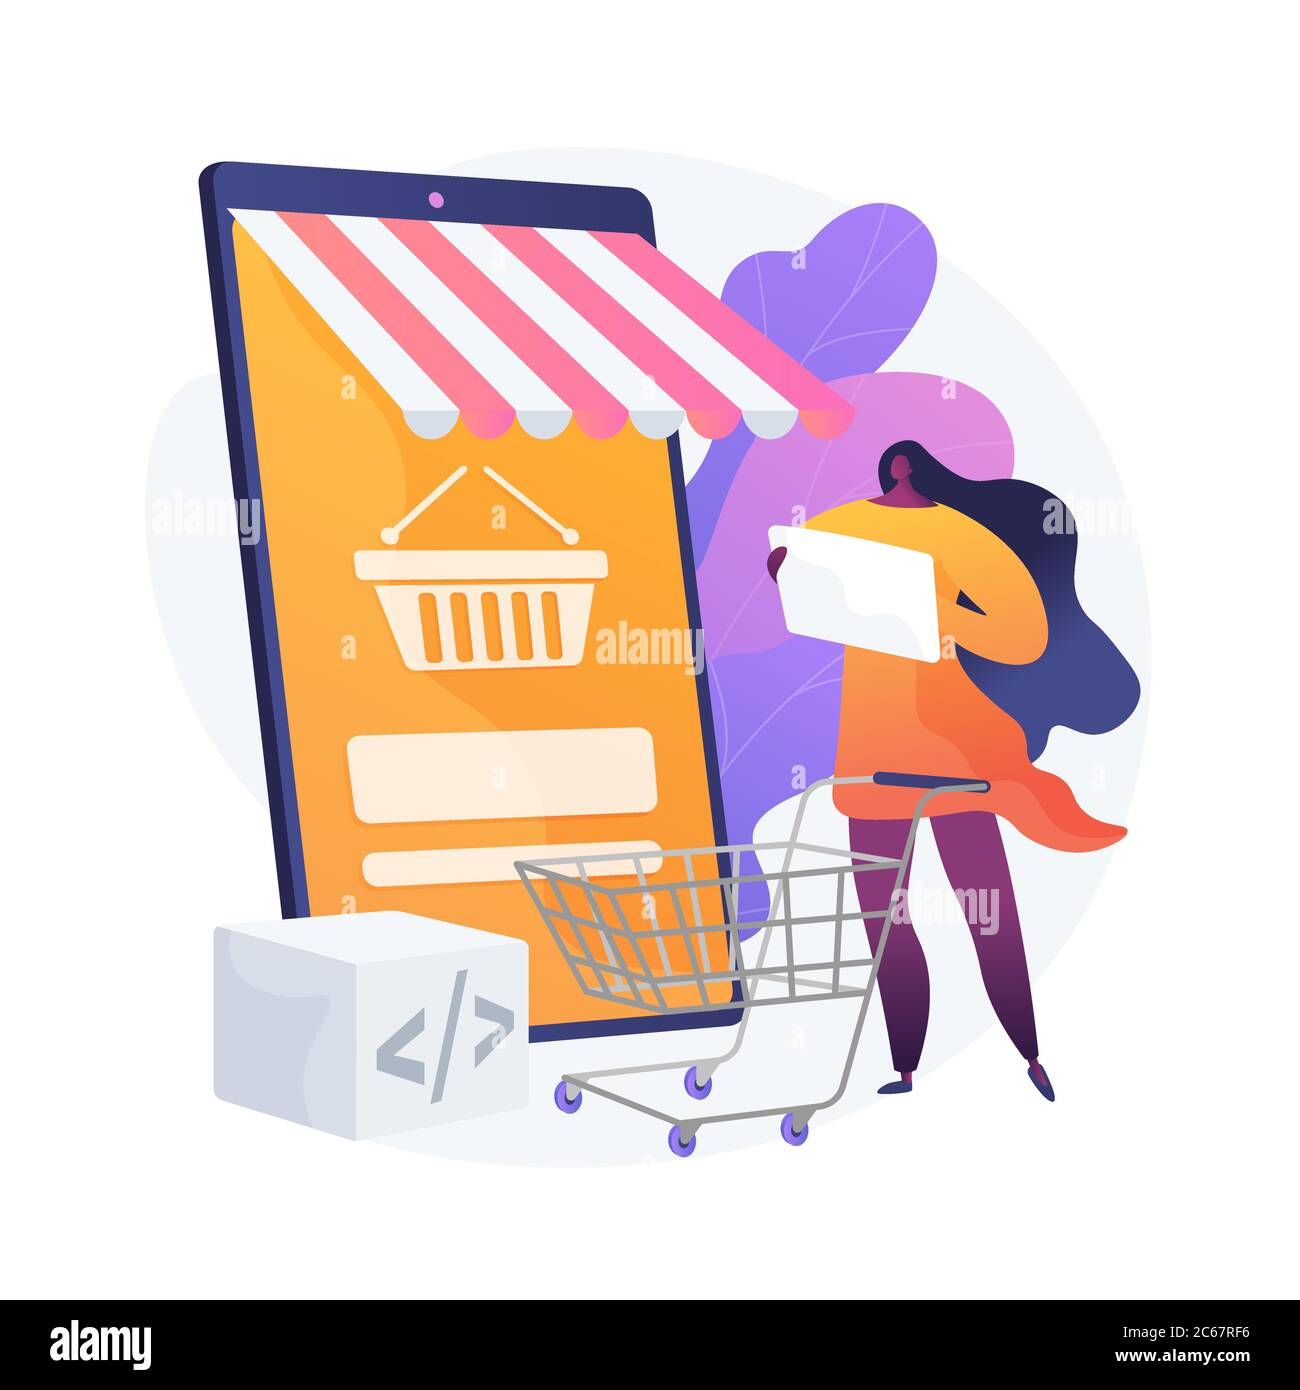 Product selection vector concept metaphor. Stock Vector